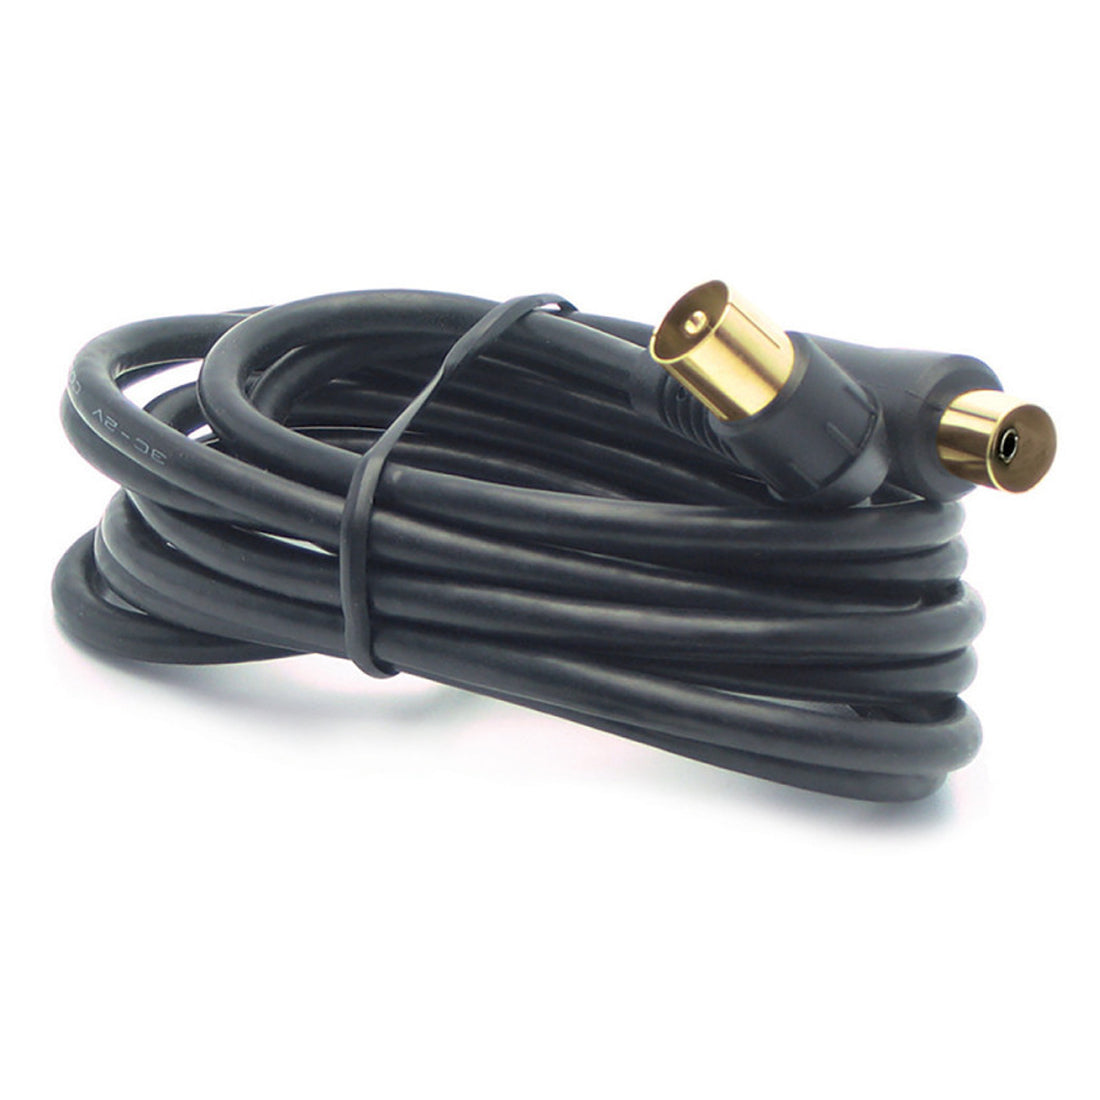 Metronic Coaxial TV Extension Cable M/F Black, TV Antenna Cable, HD Channel Reception, 5 m